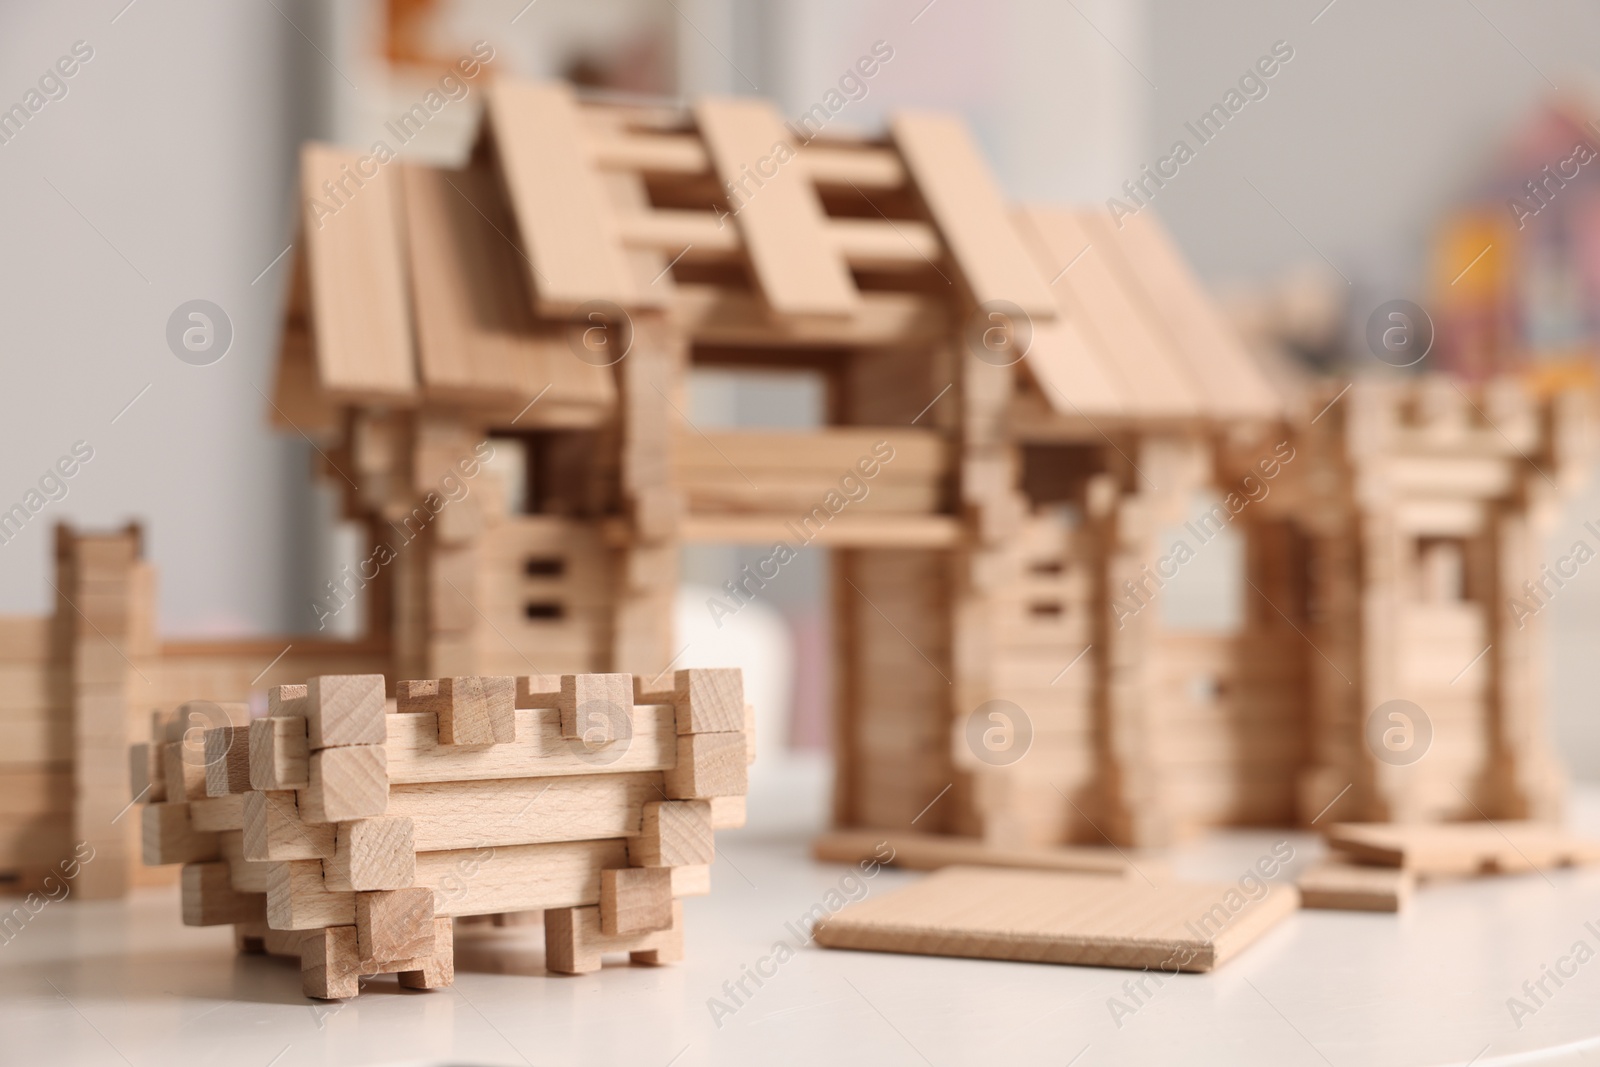 Photo of Wooden entry gate and building blocks on white table indoors, selective focus. Children's toy